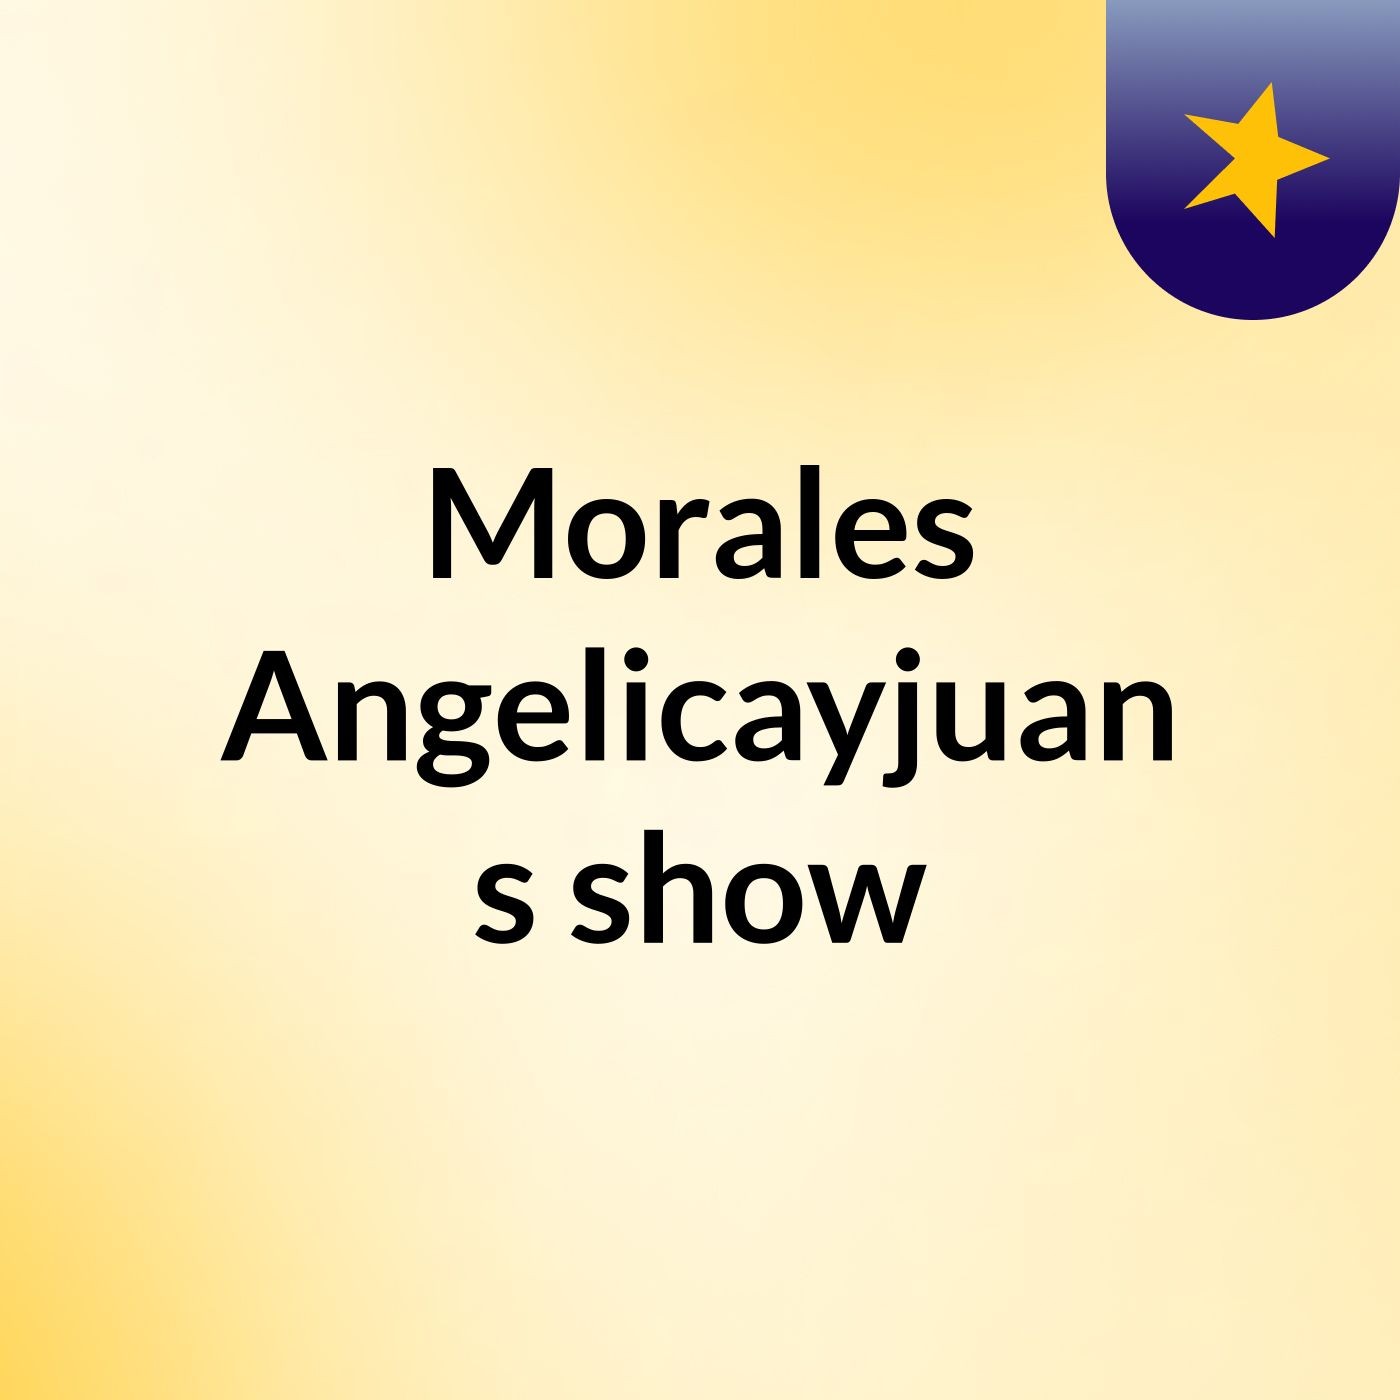 Morales Angelicayjuan's show